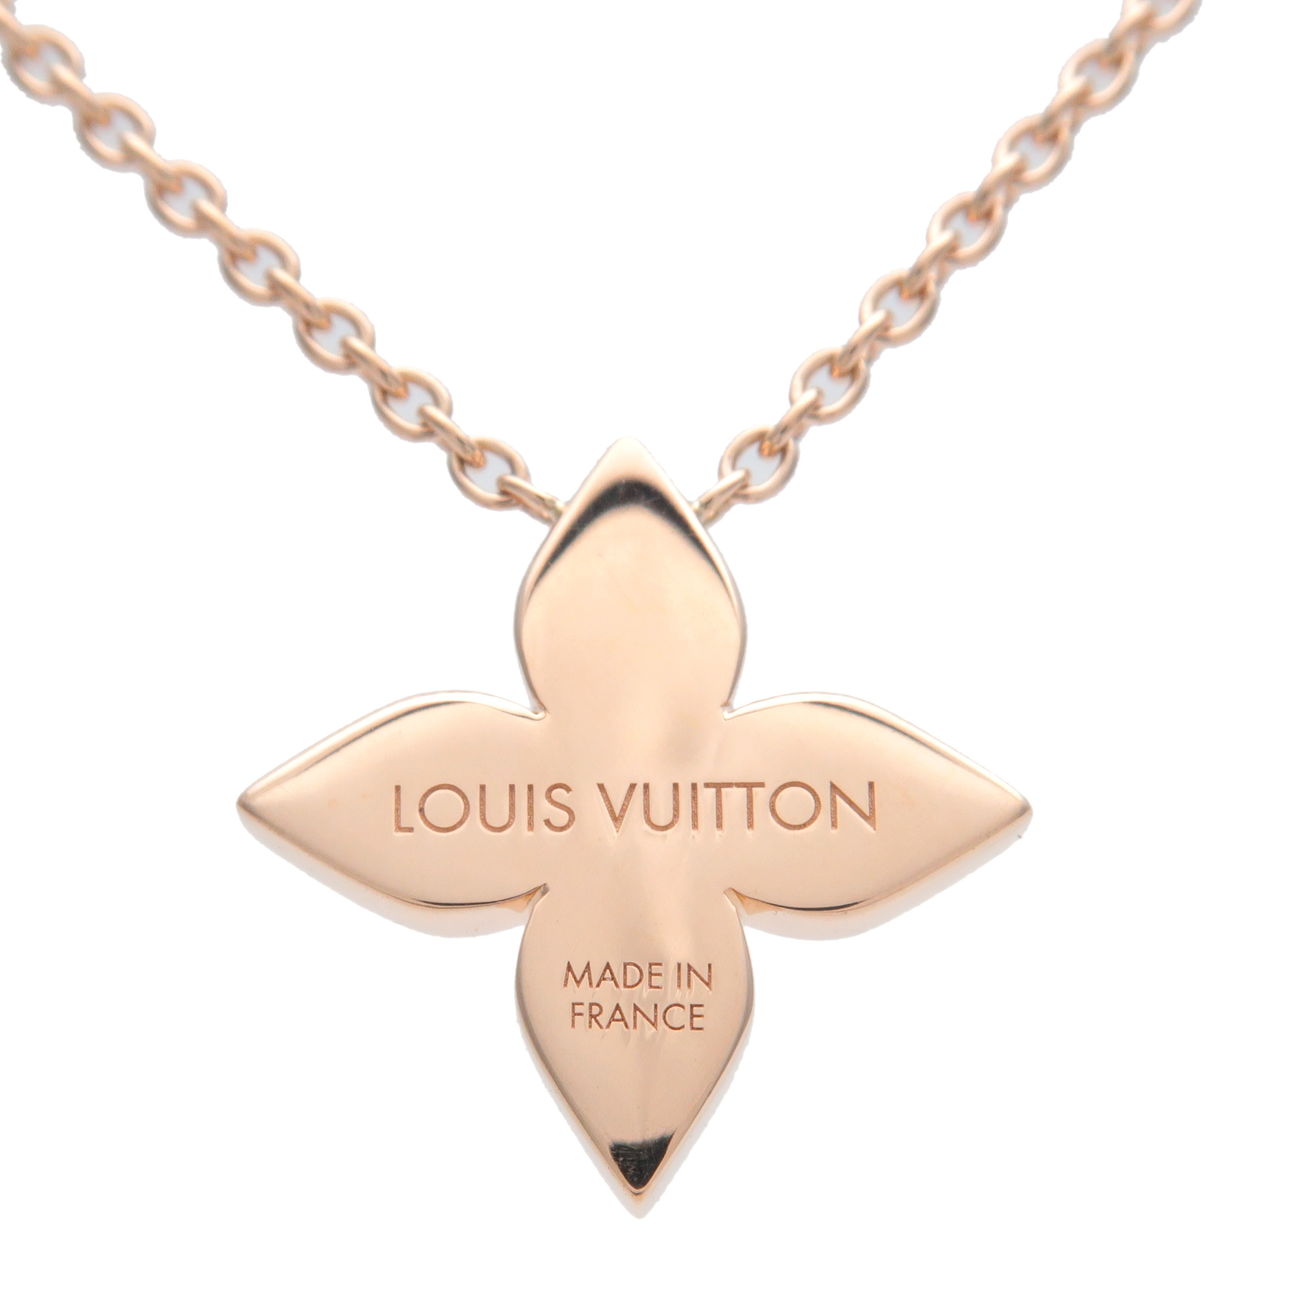 Star - Louis - in Tights and Louis Vuitton Slingbacks - Vuitton - Necklace  - Diamond - Pendentif - Blossom - K18PG - Q93522 – louis vuitton brown coin